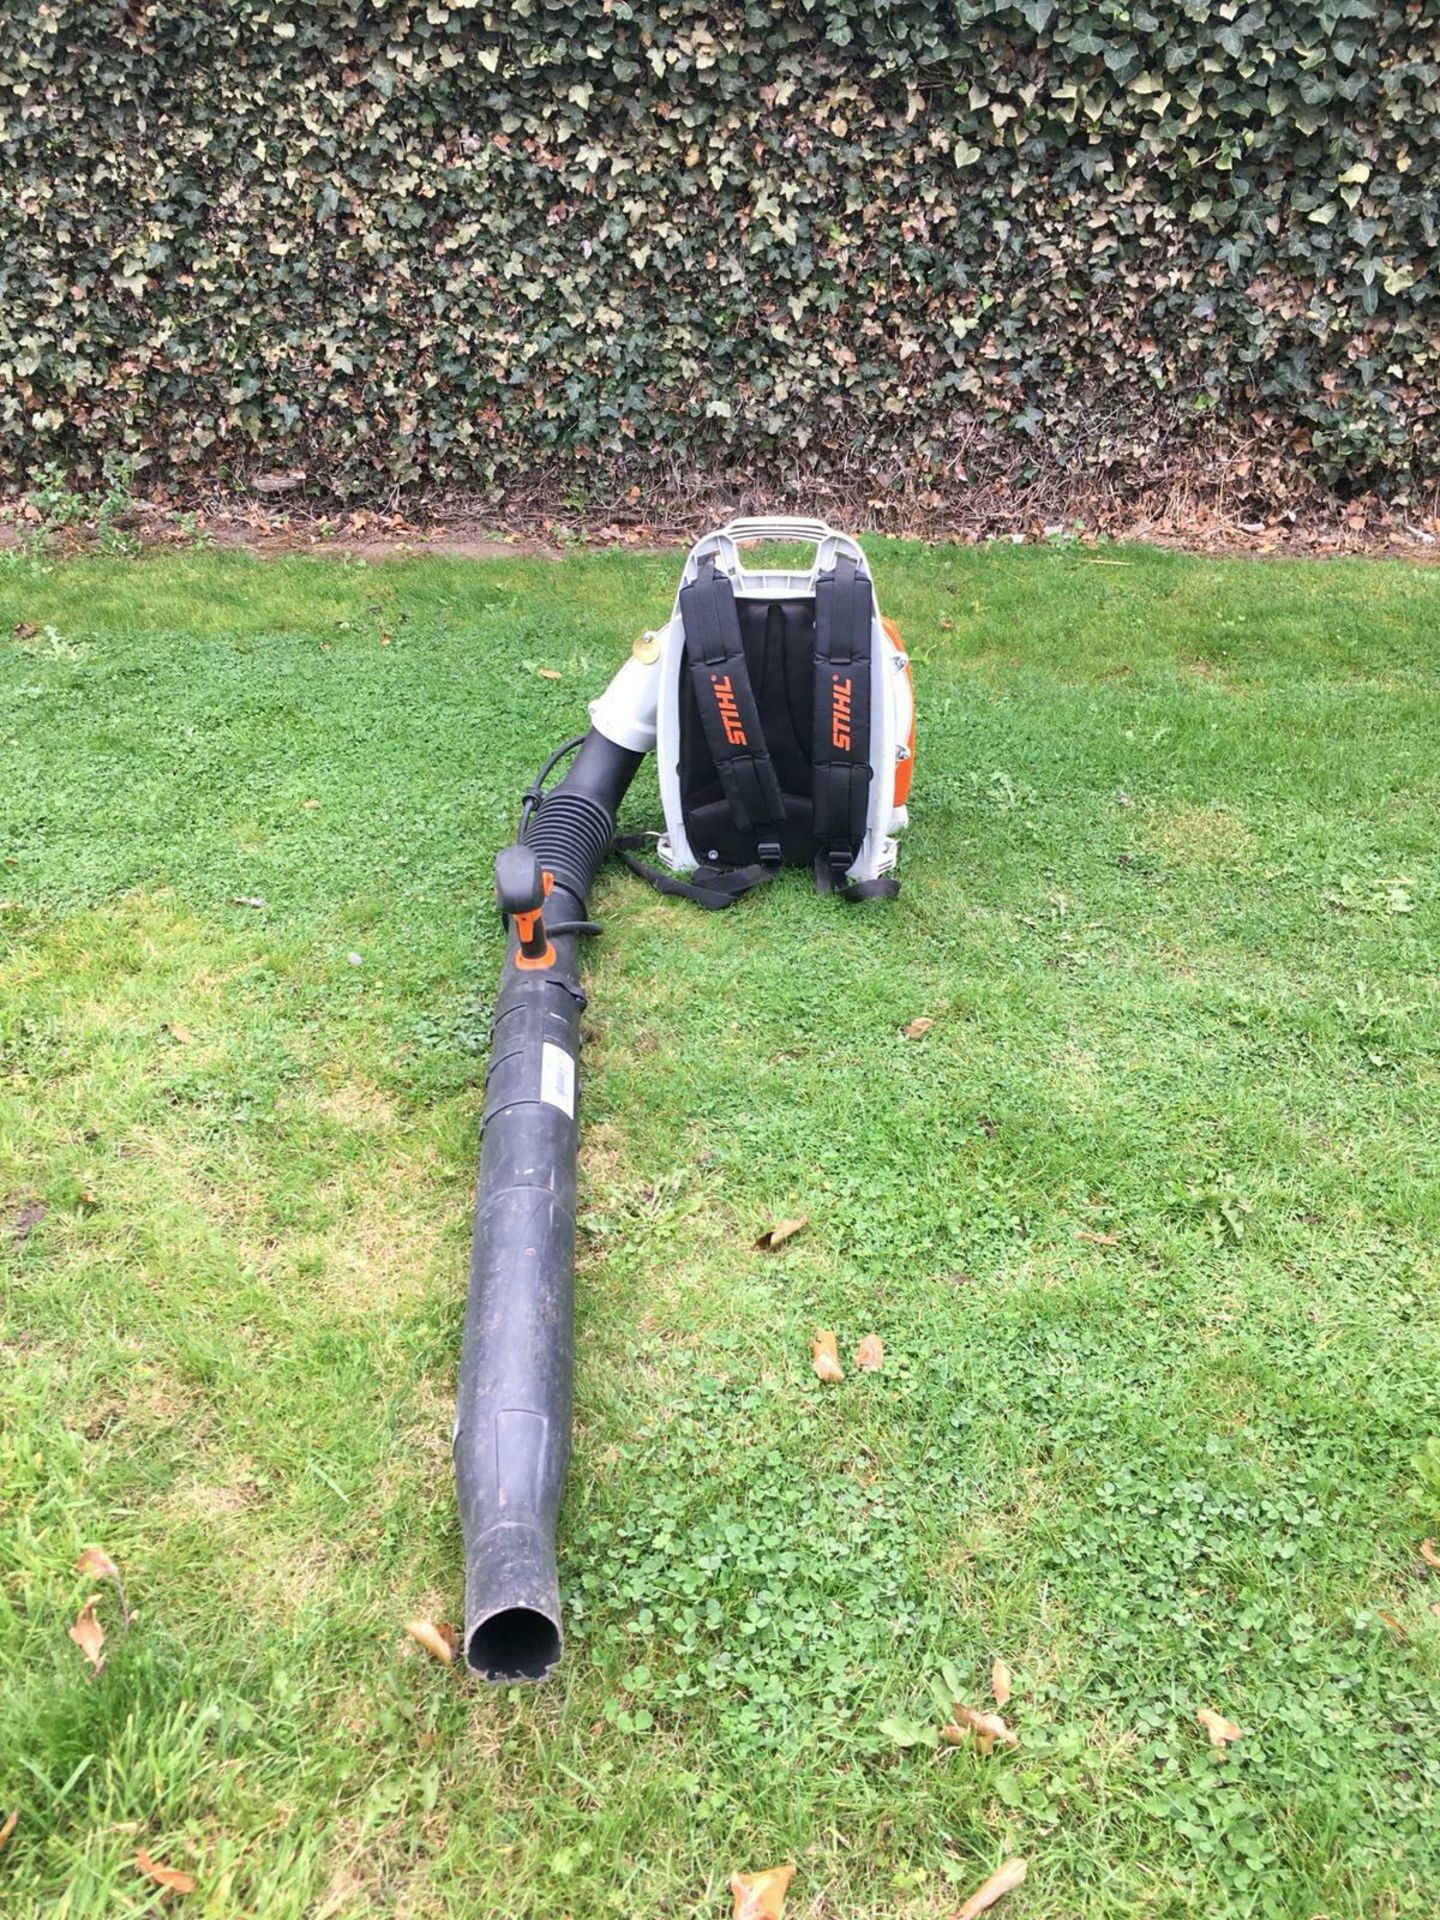 STIHL BACK PACK LEAF BLOWER, MODEL: BR430, MANUFACTURED 06/2016, EXCELLENT WORKING CONDITION - Image 5 of 5